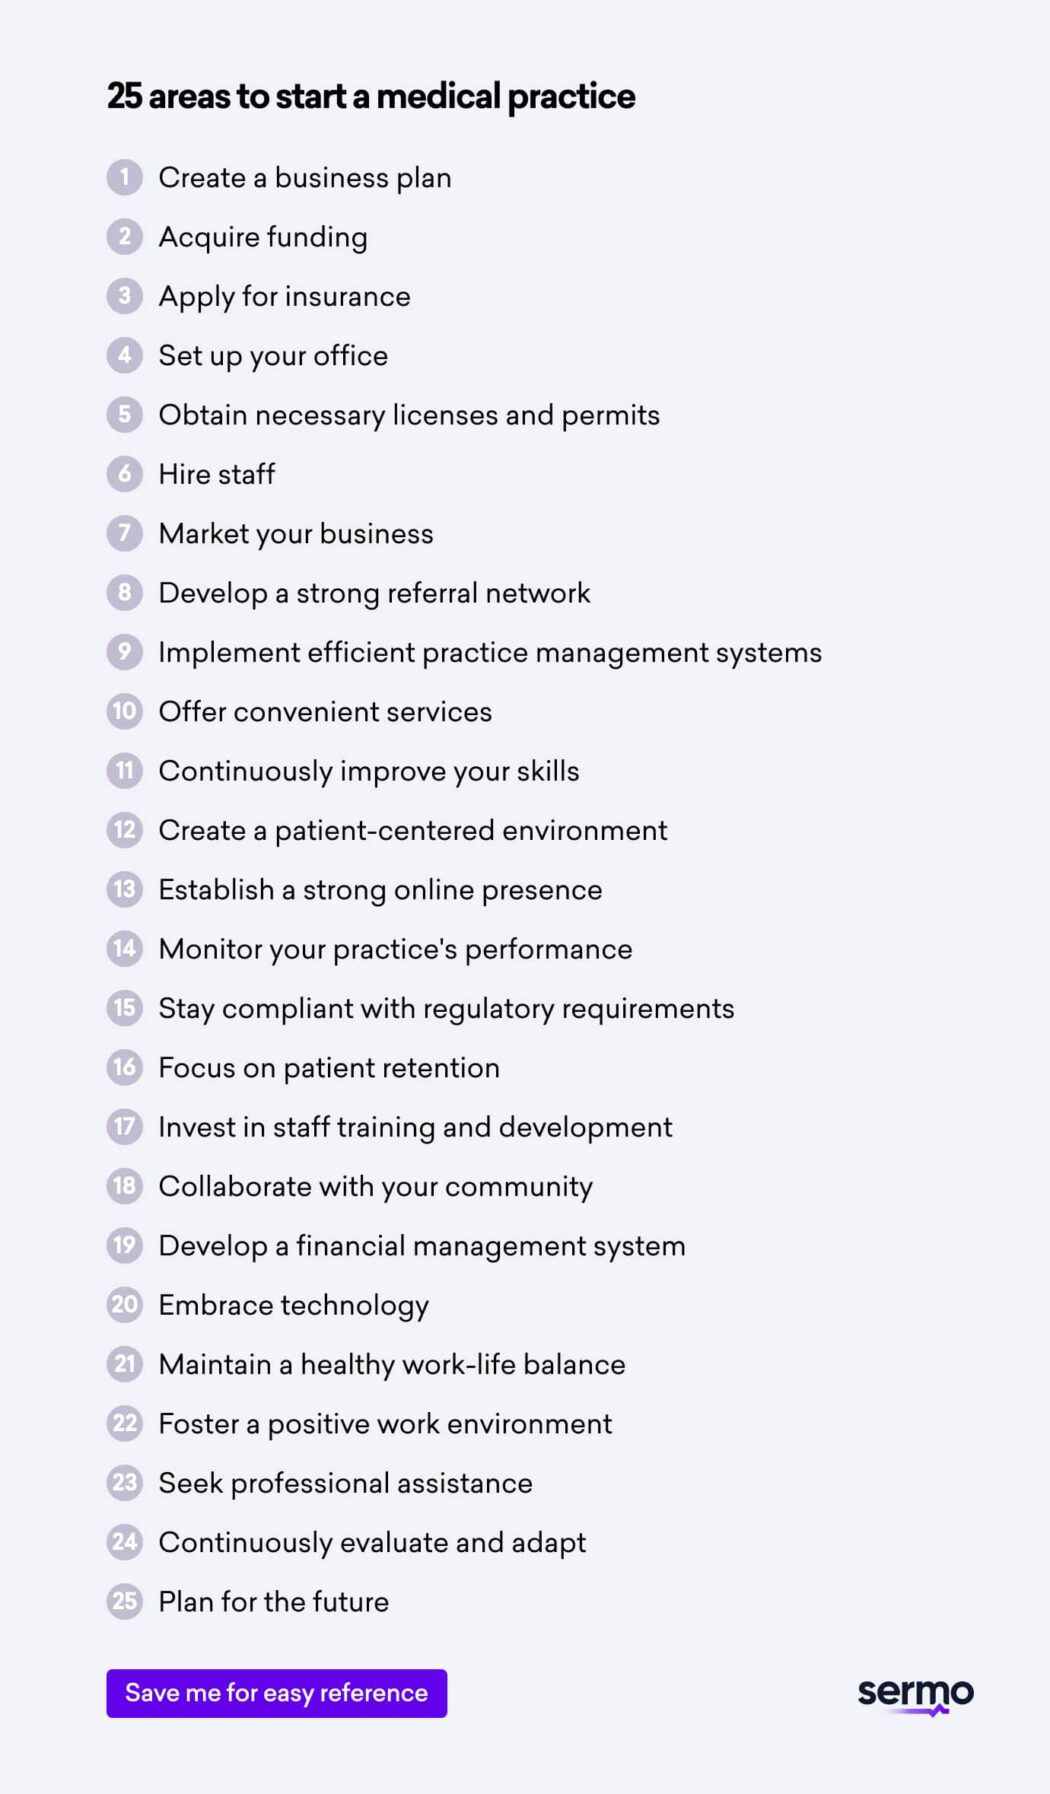 25 areas to start a medical practice according to physicians on Sermo